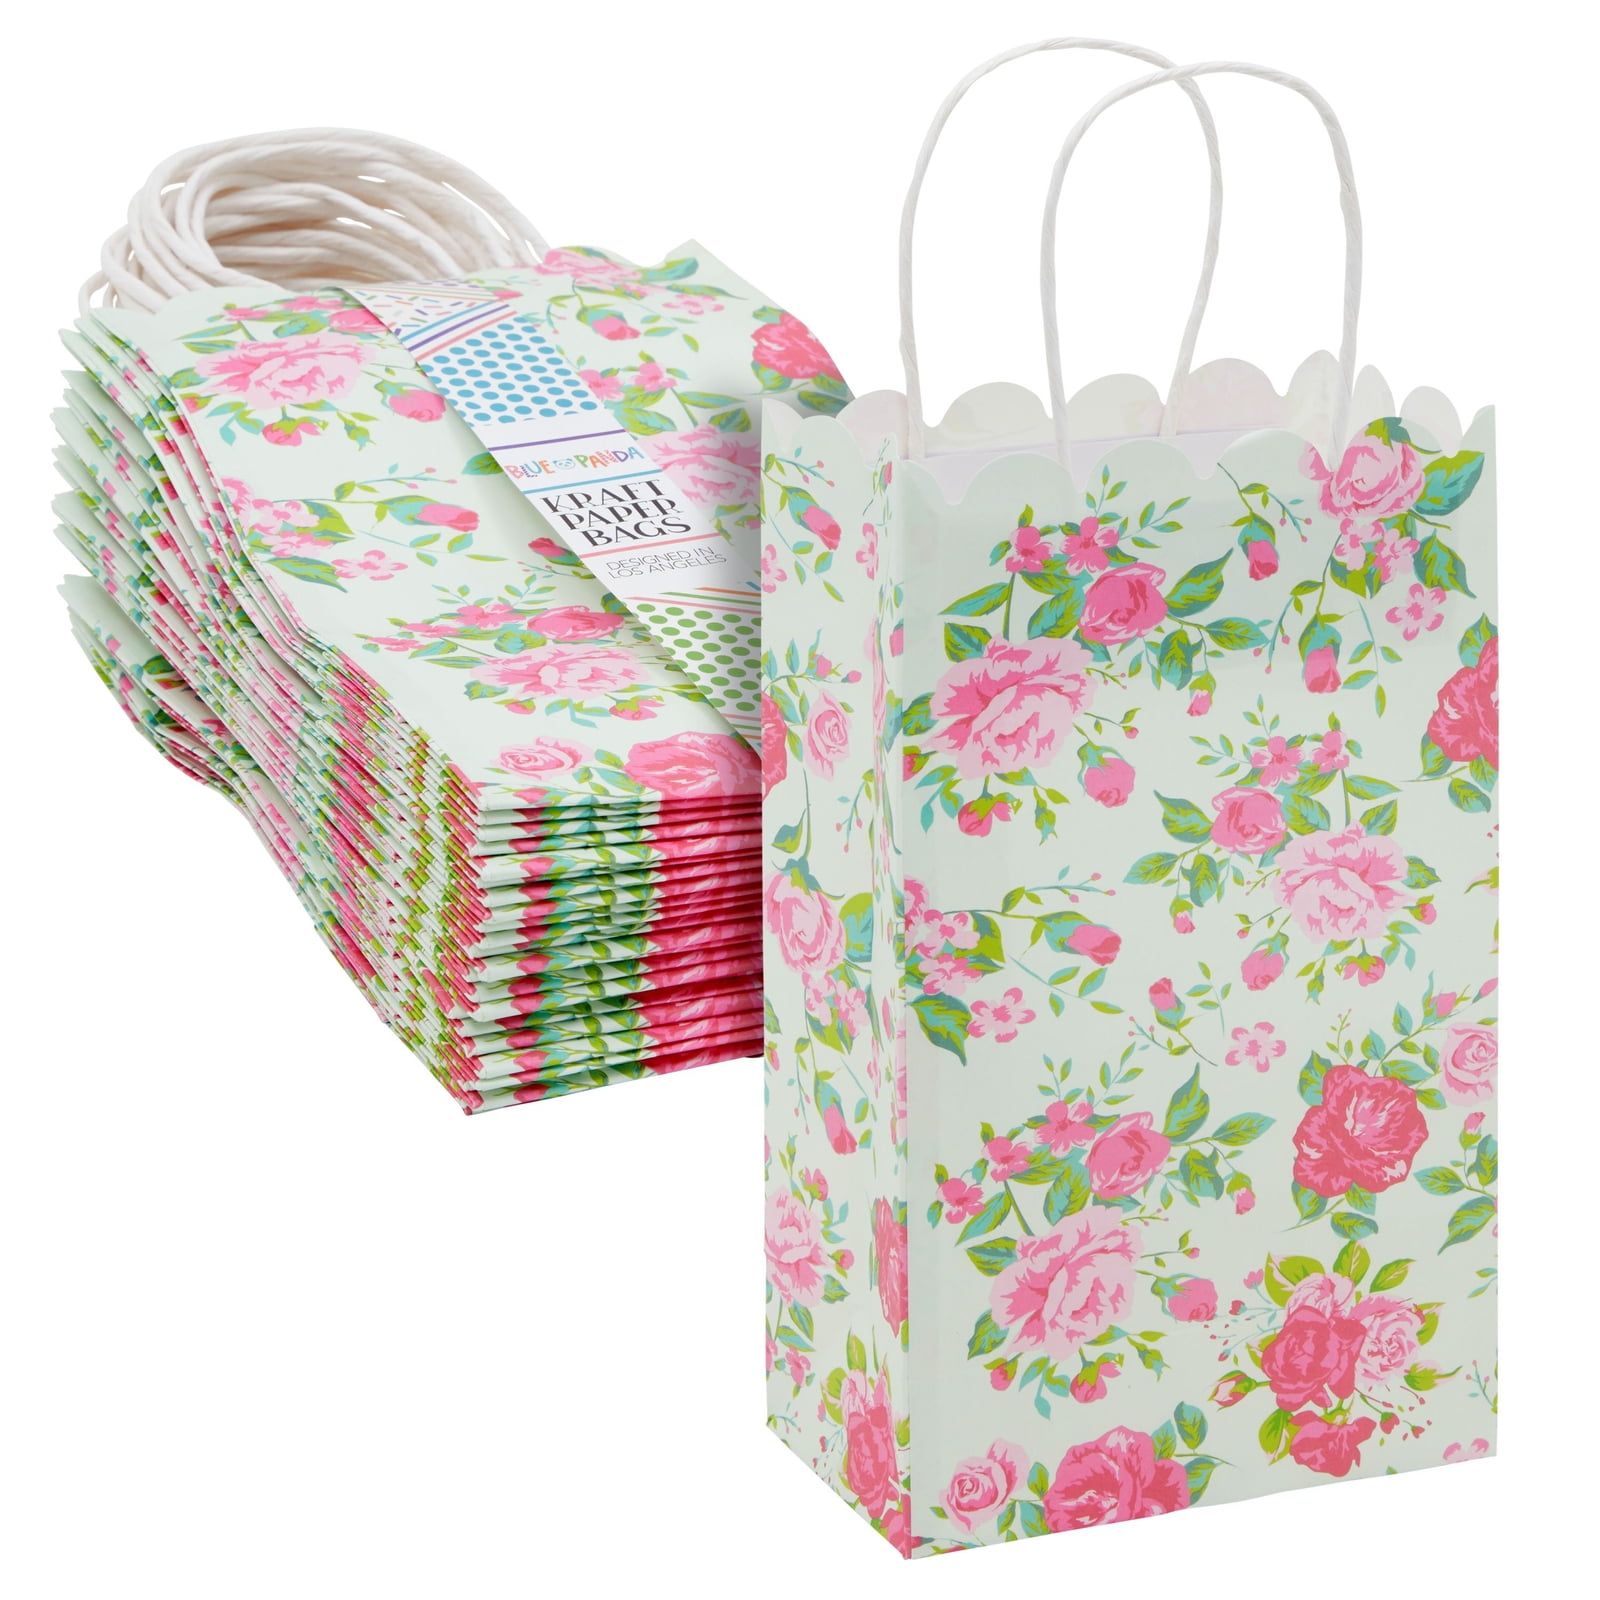 EXTRA PARTY GIFT BAGS  SMALL BRIGHT PAPER PARTY BAGS GIFT BAG WITH HANDLES 